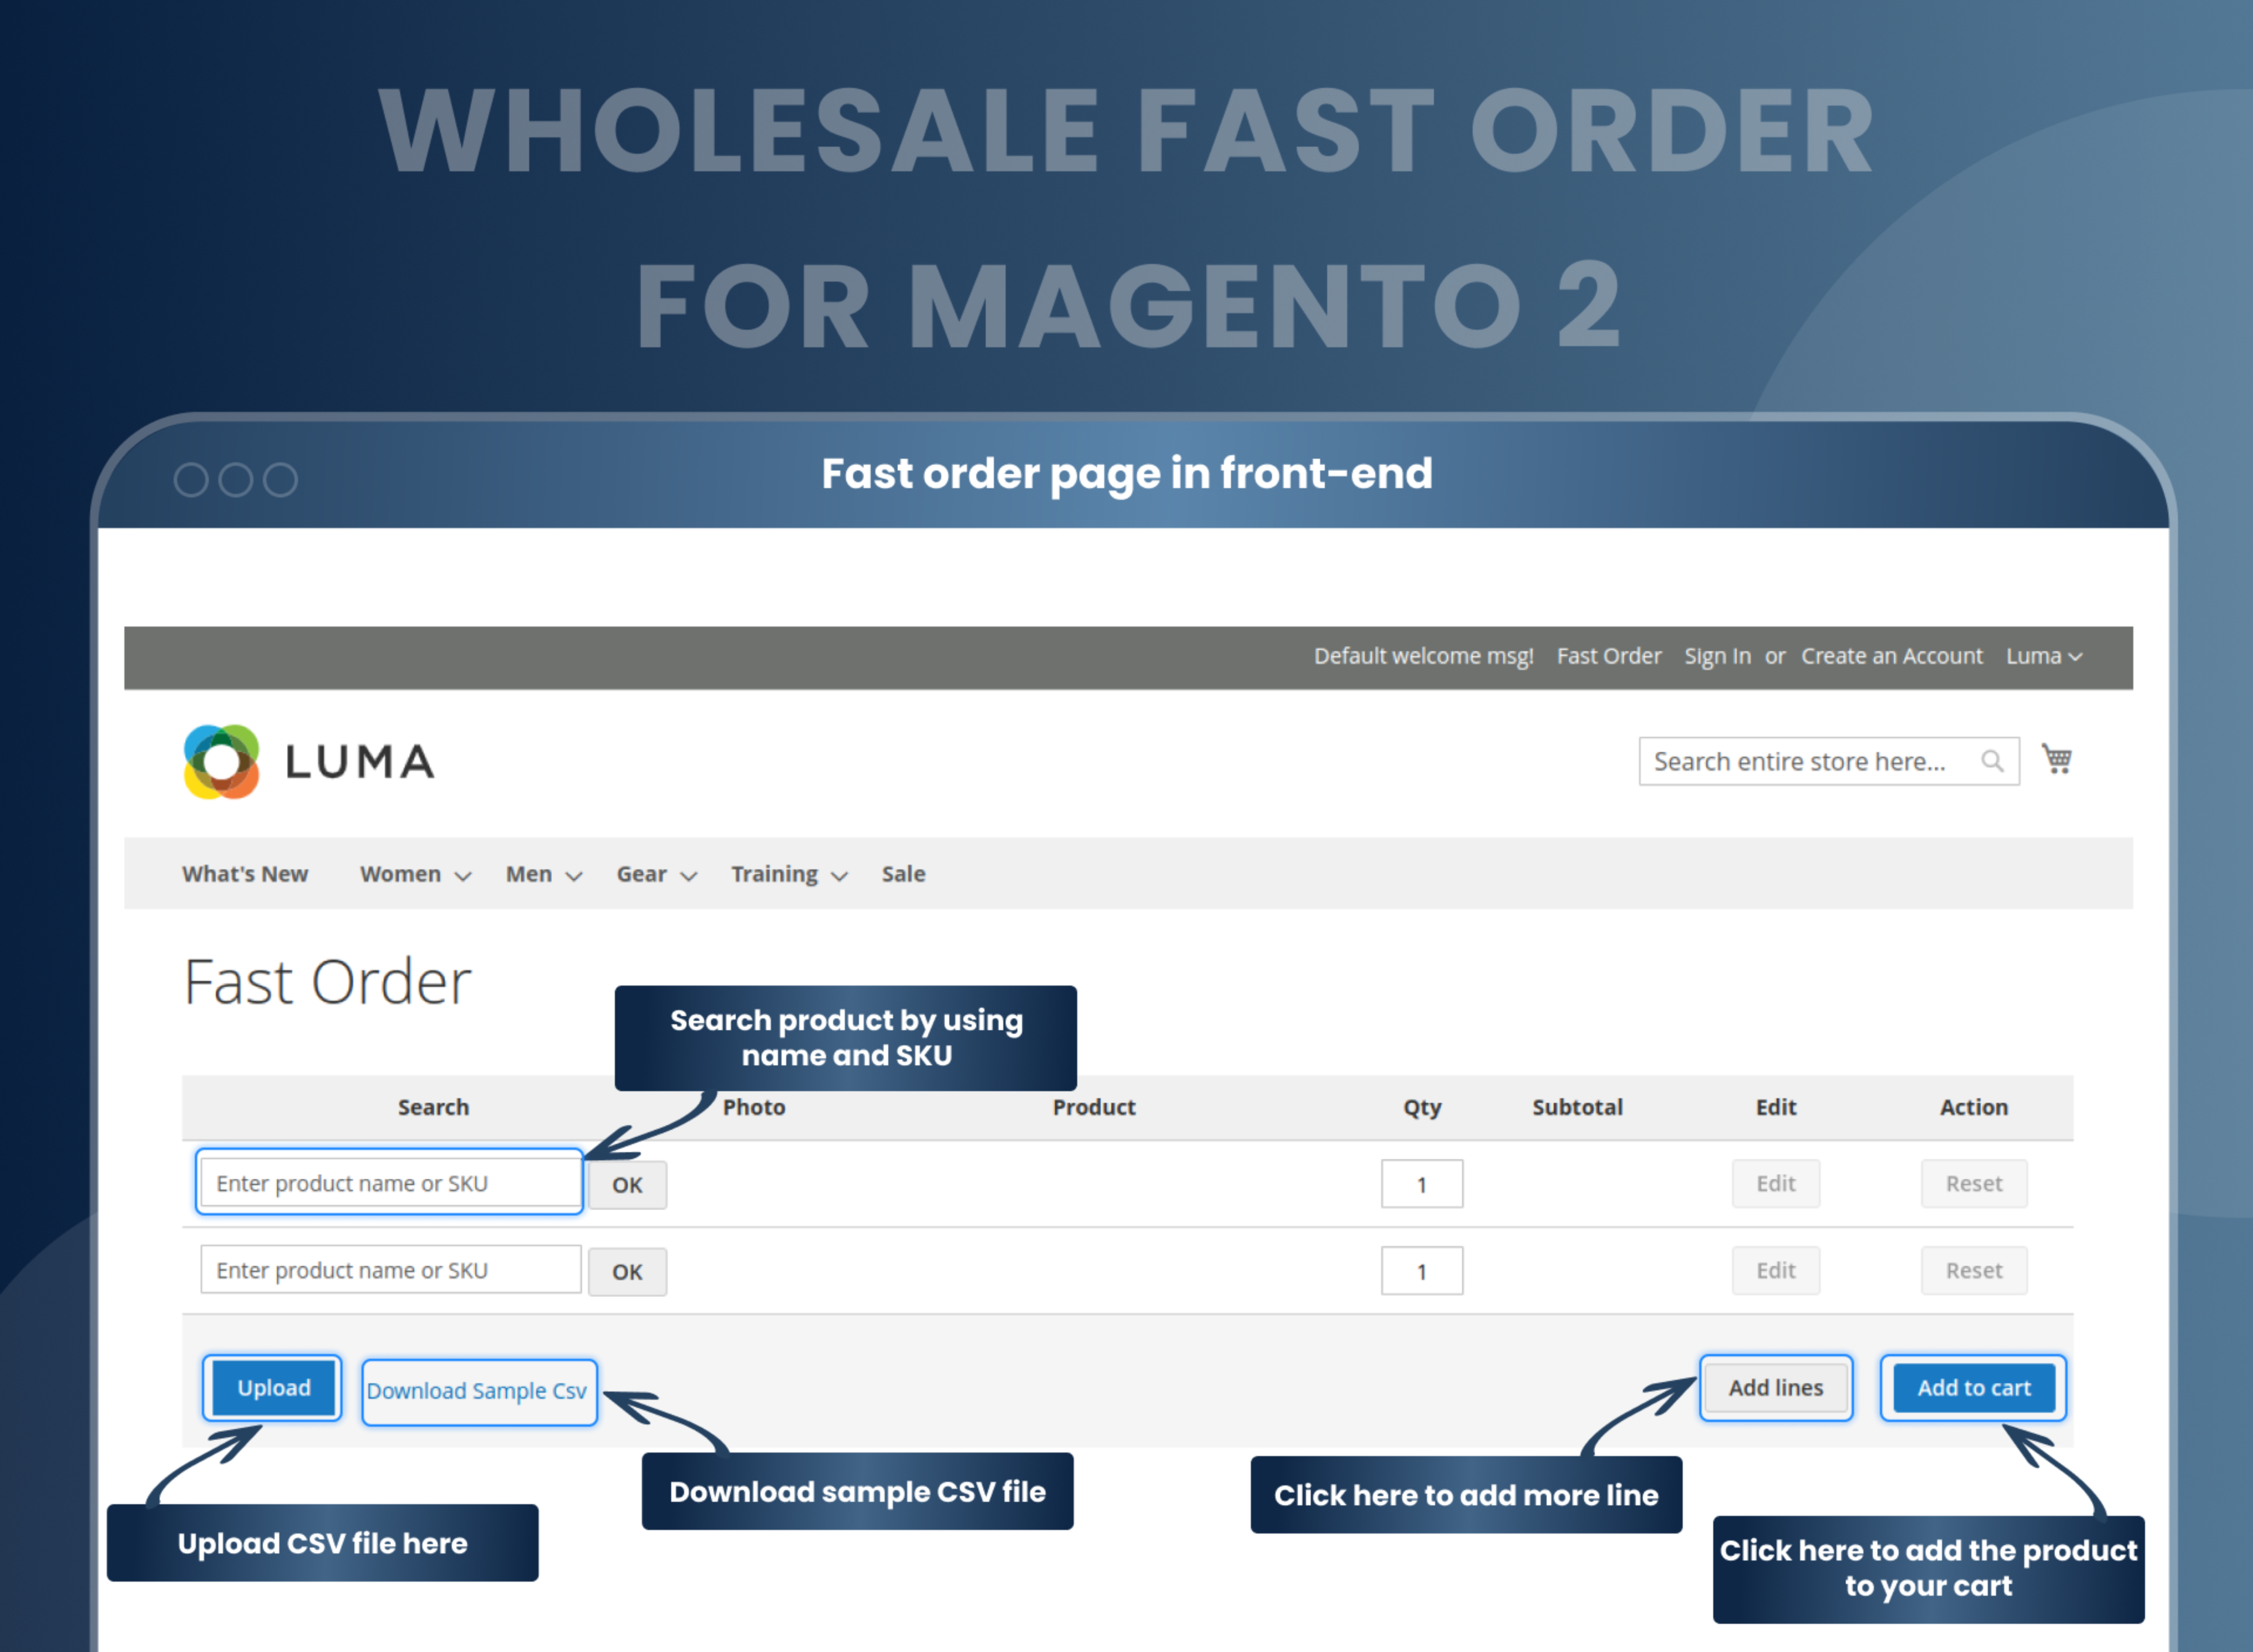 Fast order page in front-end